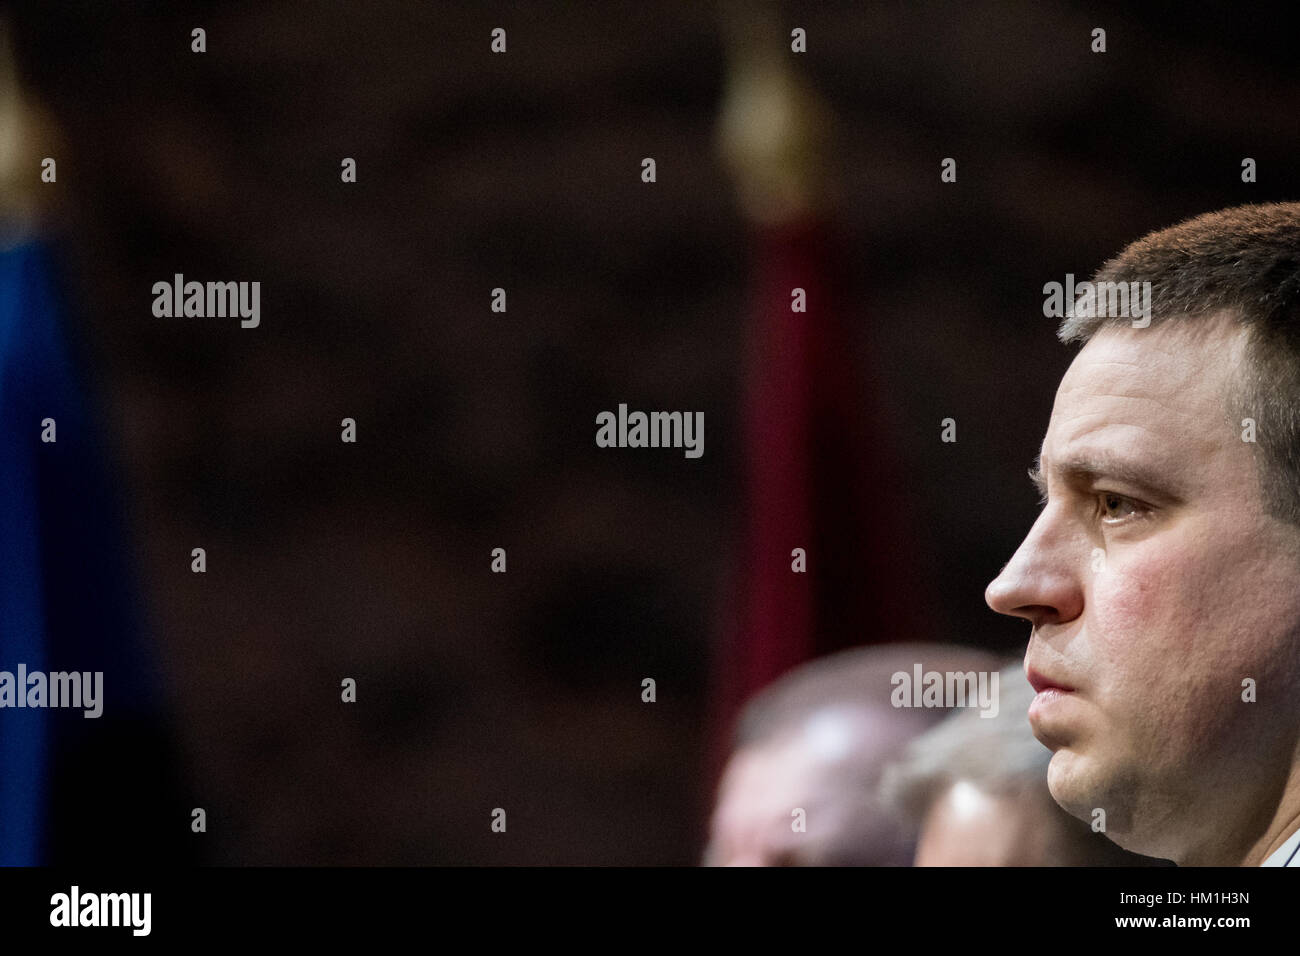 Tallinn, Estonia. 31st Jan, 2017. Estonian Prime Minister Juri Ratas looks on during a press conference after a meeting with Lithuanian Prime Minister Saulius Skvernelis (not pictured) and Latvian Prime Minister Maris Kucinskis (not pictured). Today in Tallinn the prime ministers of the three Baltic States signed the Rail Baltic Agreement, which according to Prime Minister Juri Ratas should become the foundation for more active economic and security cooperation of the three countries. Nicolas Bouvy/Alamy Live News Stock Photo